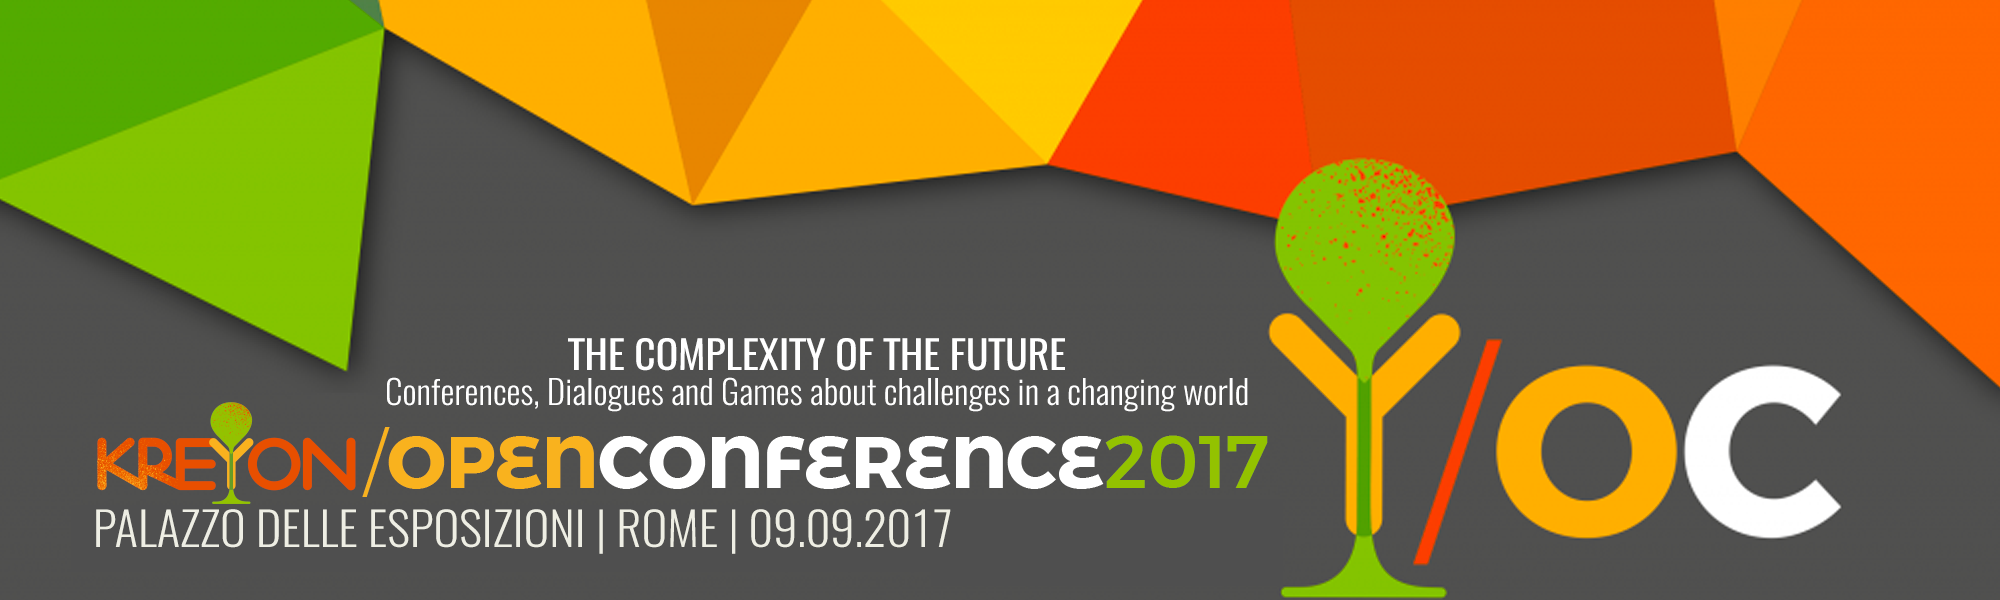 Kreyon Open Conference - The Complexity of the Future